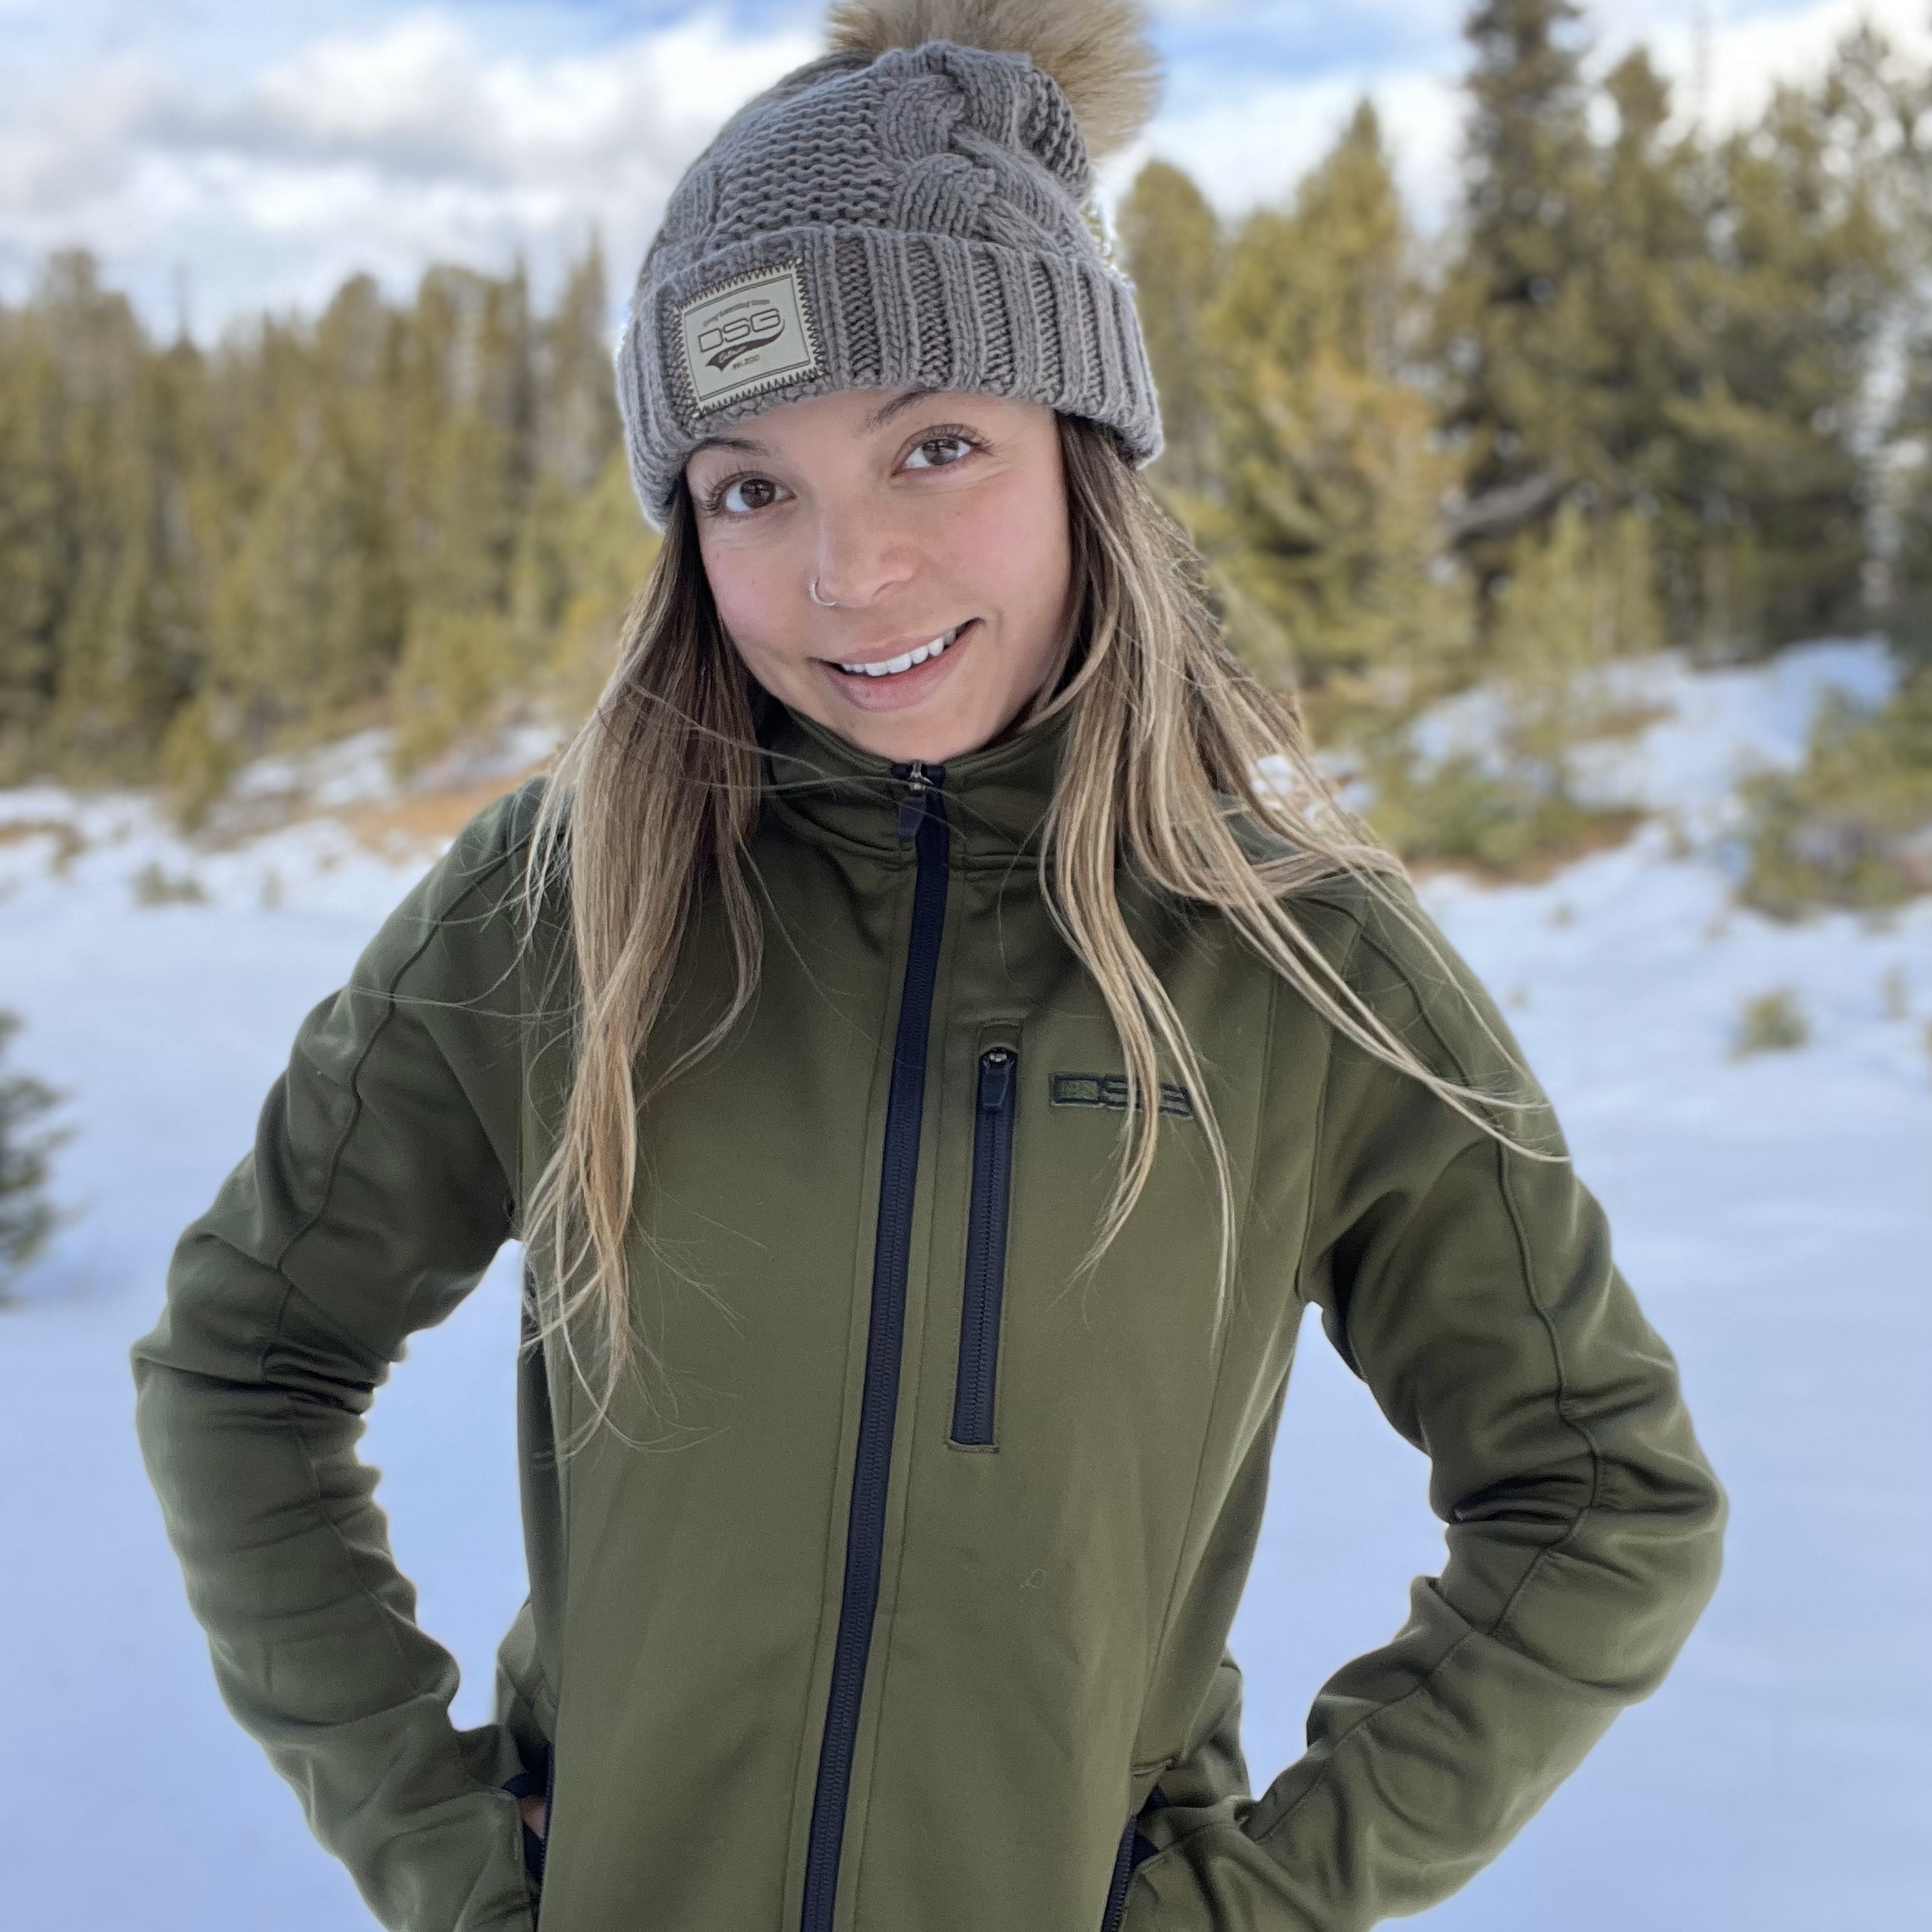 Designed Specifically For Women, DSG Outerwear, Partners With KBM